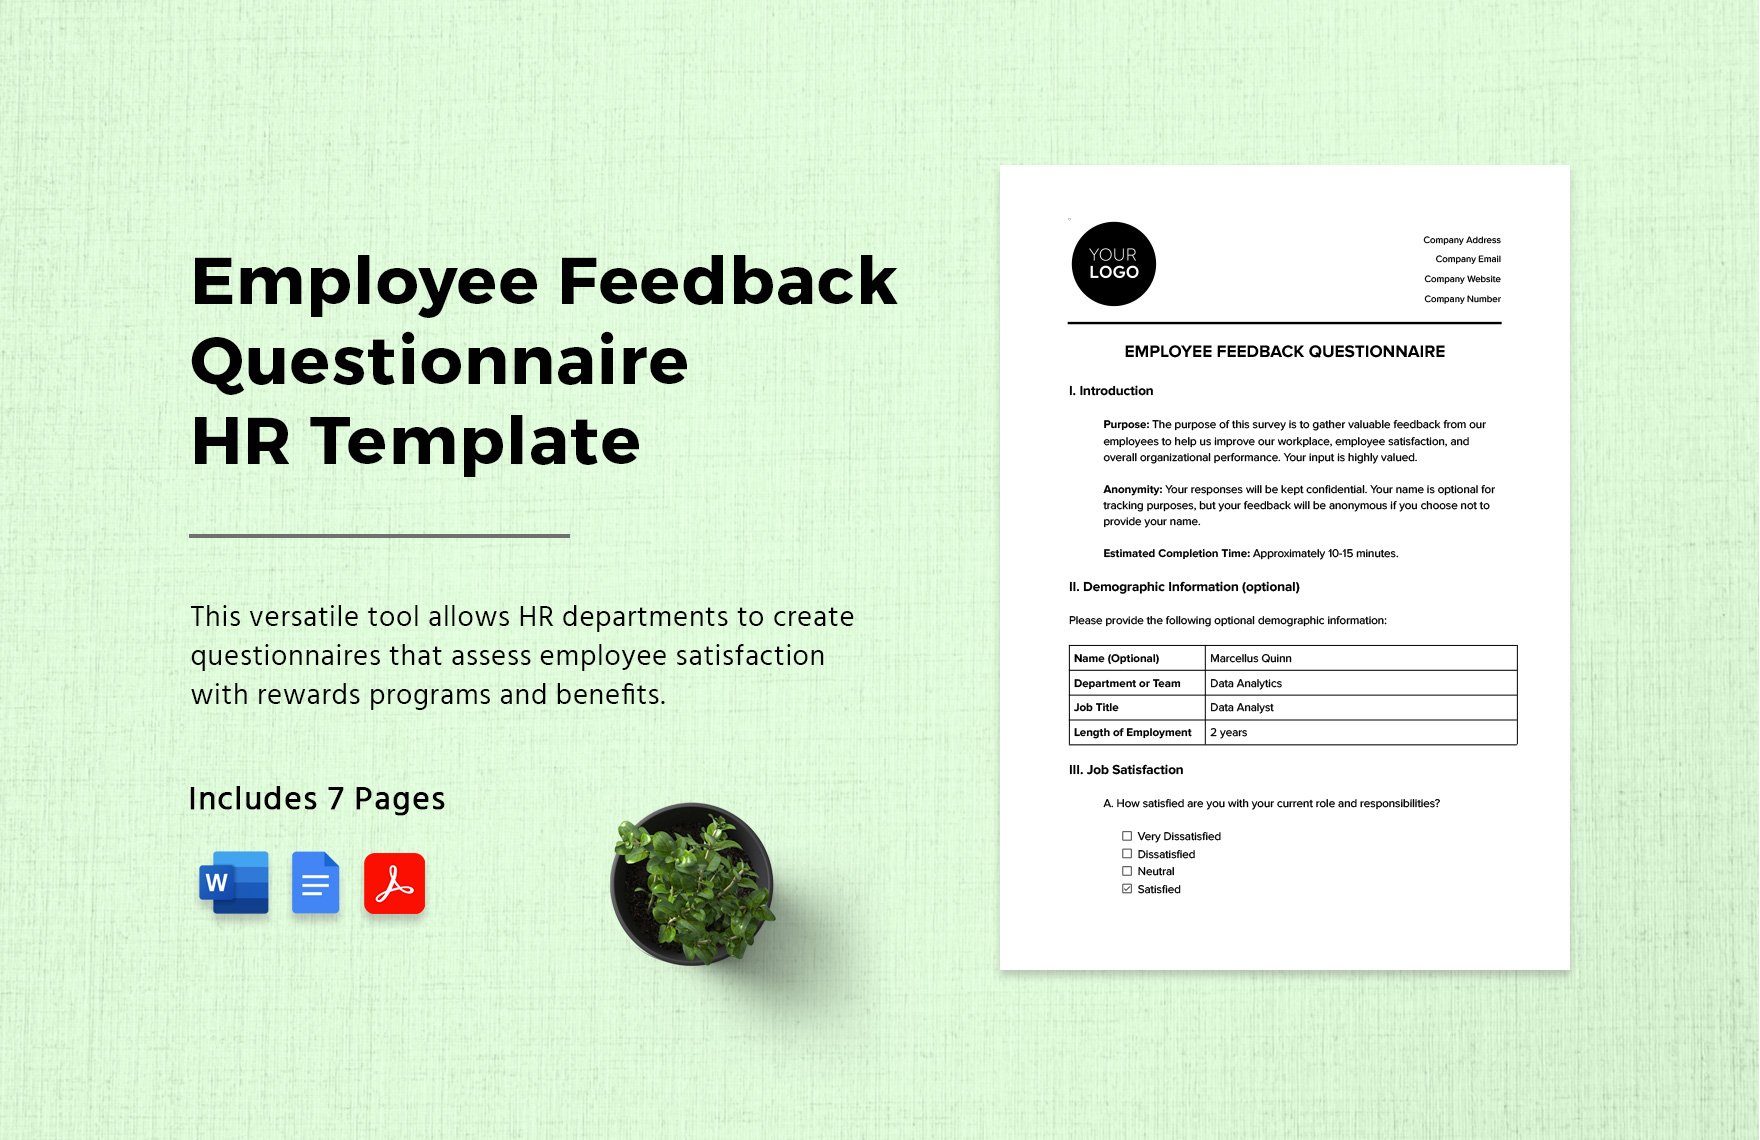 Employee Feedback Questionnaire HR Template in Word, Google Docs, PDF